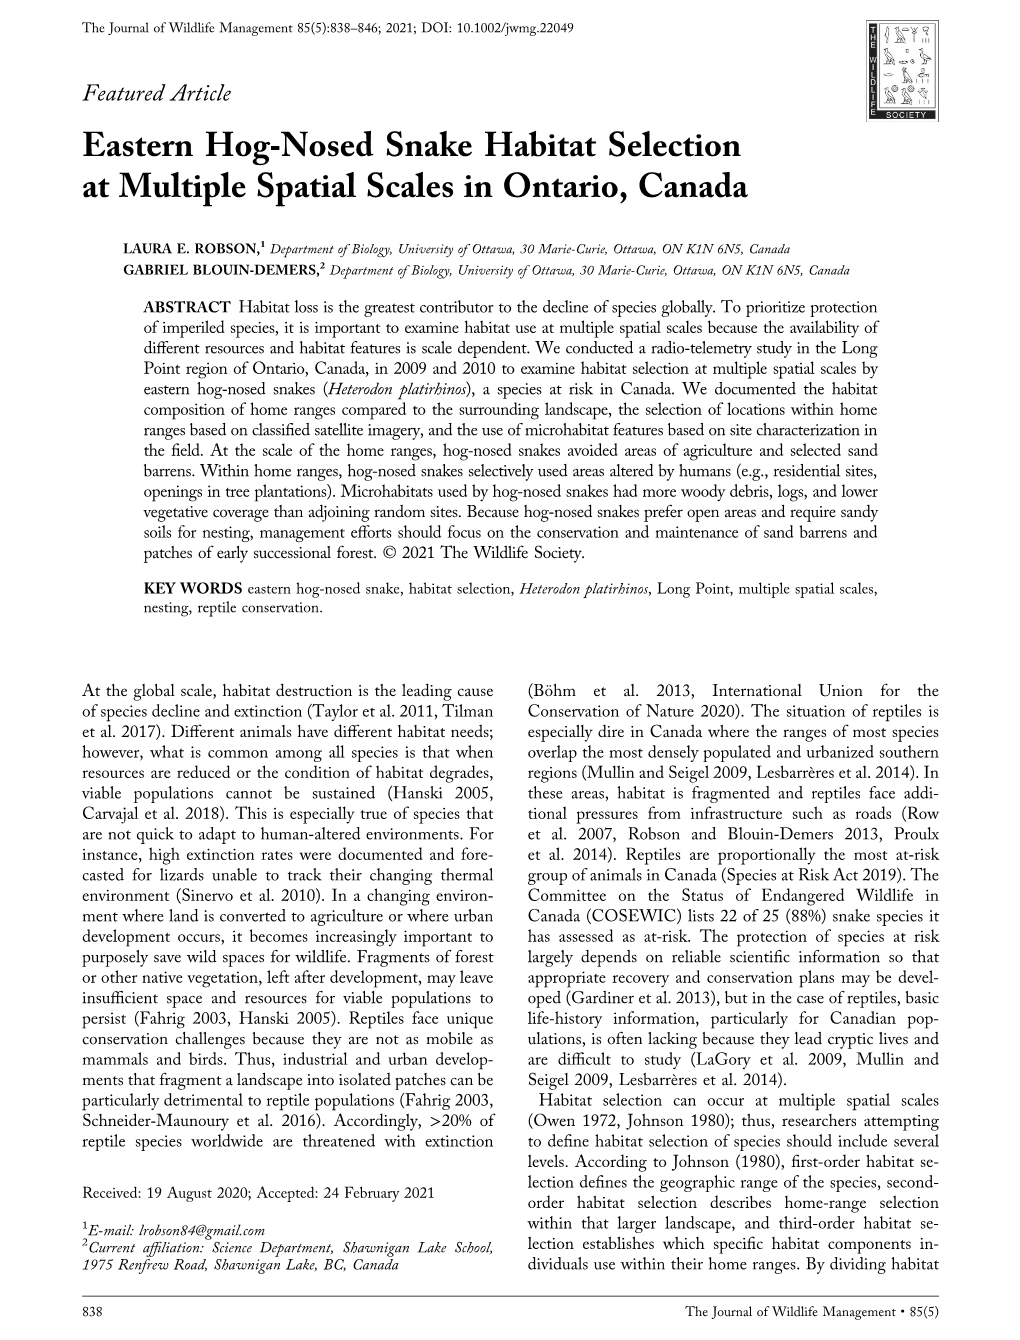 Eastern Hog‐Nosed Snake Habitat Selection at Multiple Spatial Scales in Ontario, Canada